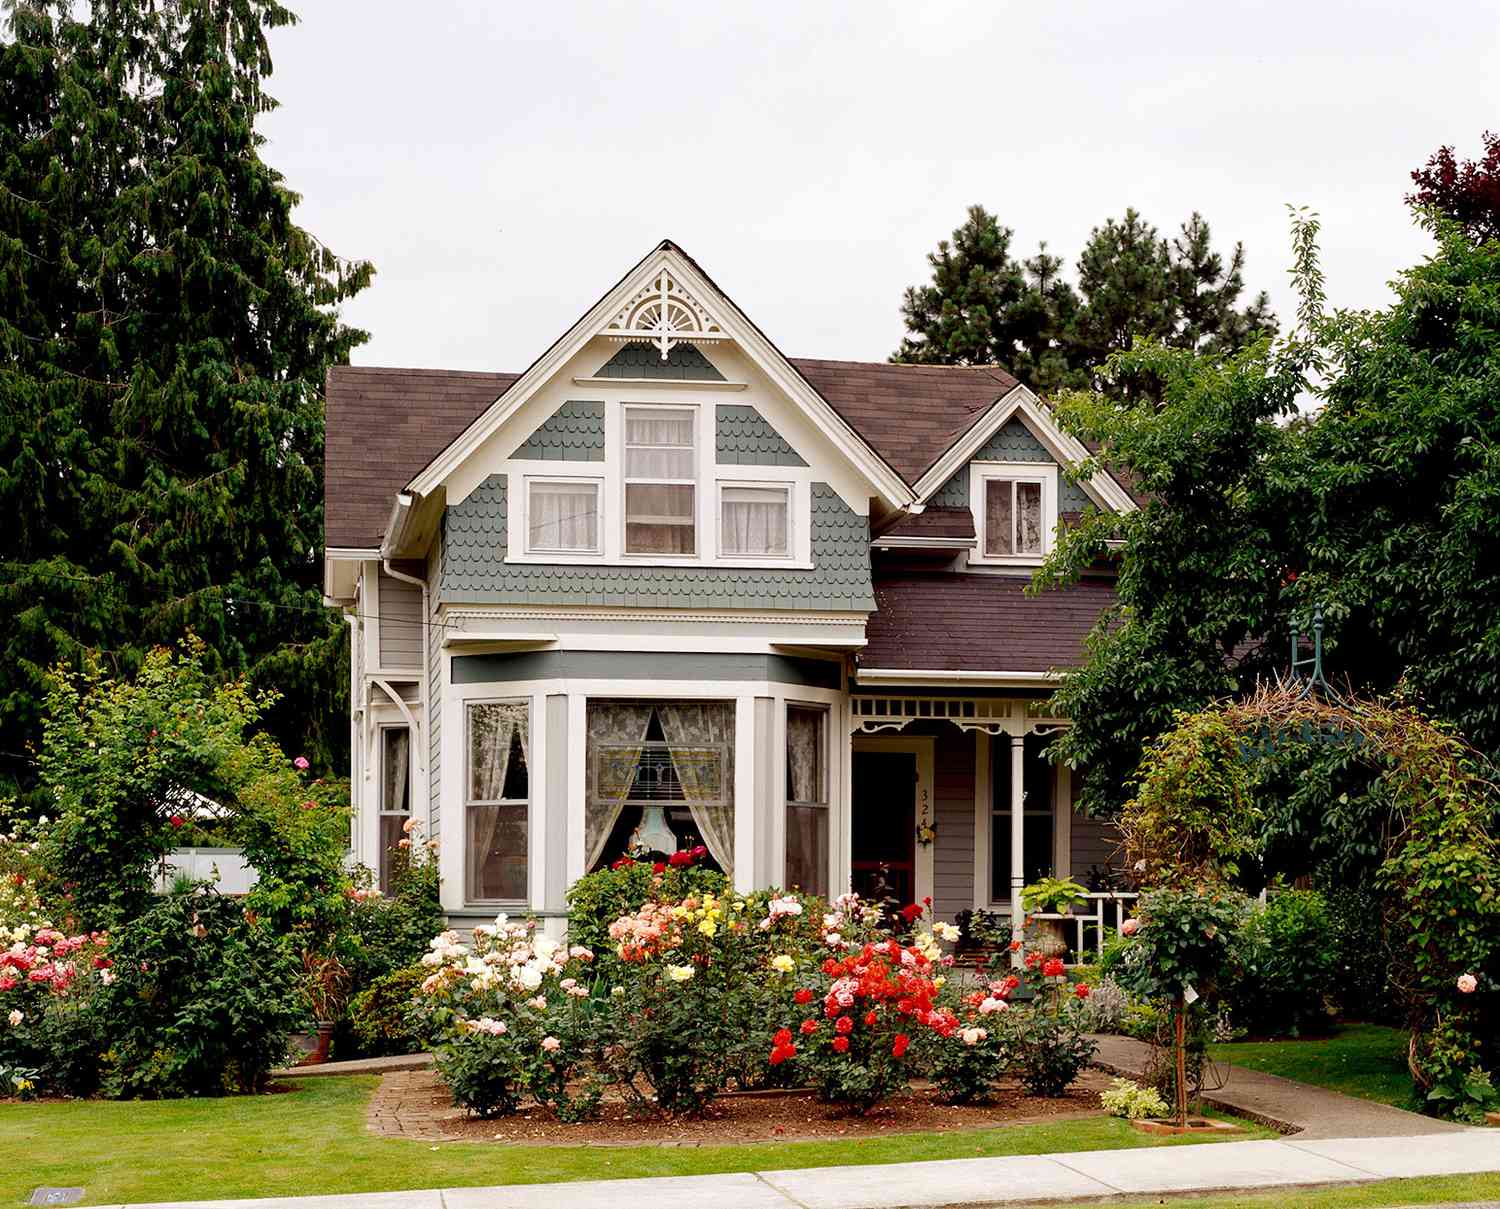 17 Victorian Style Houses With Stunning Decorative Details Better Homes Gardens